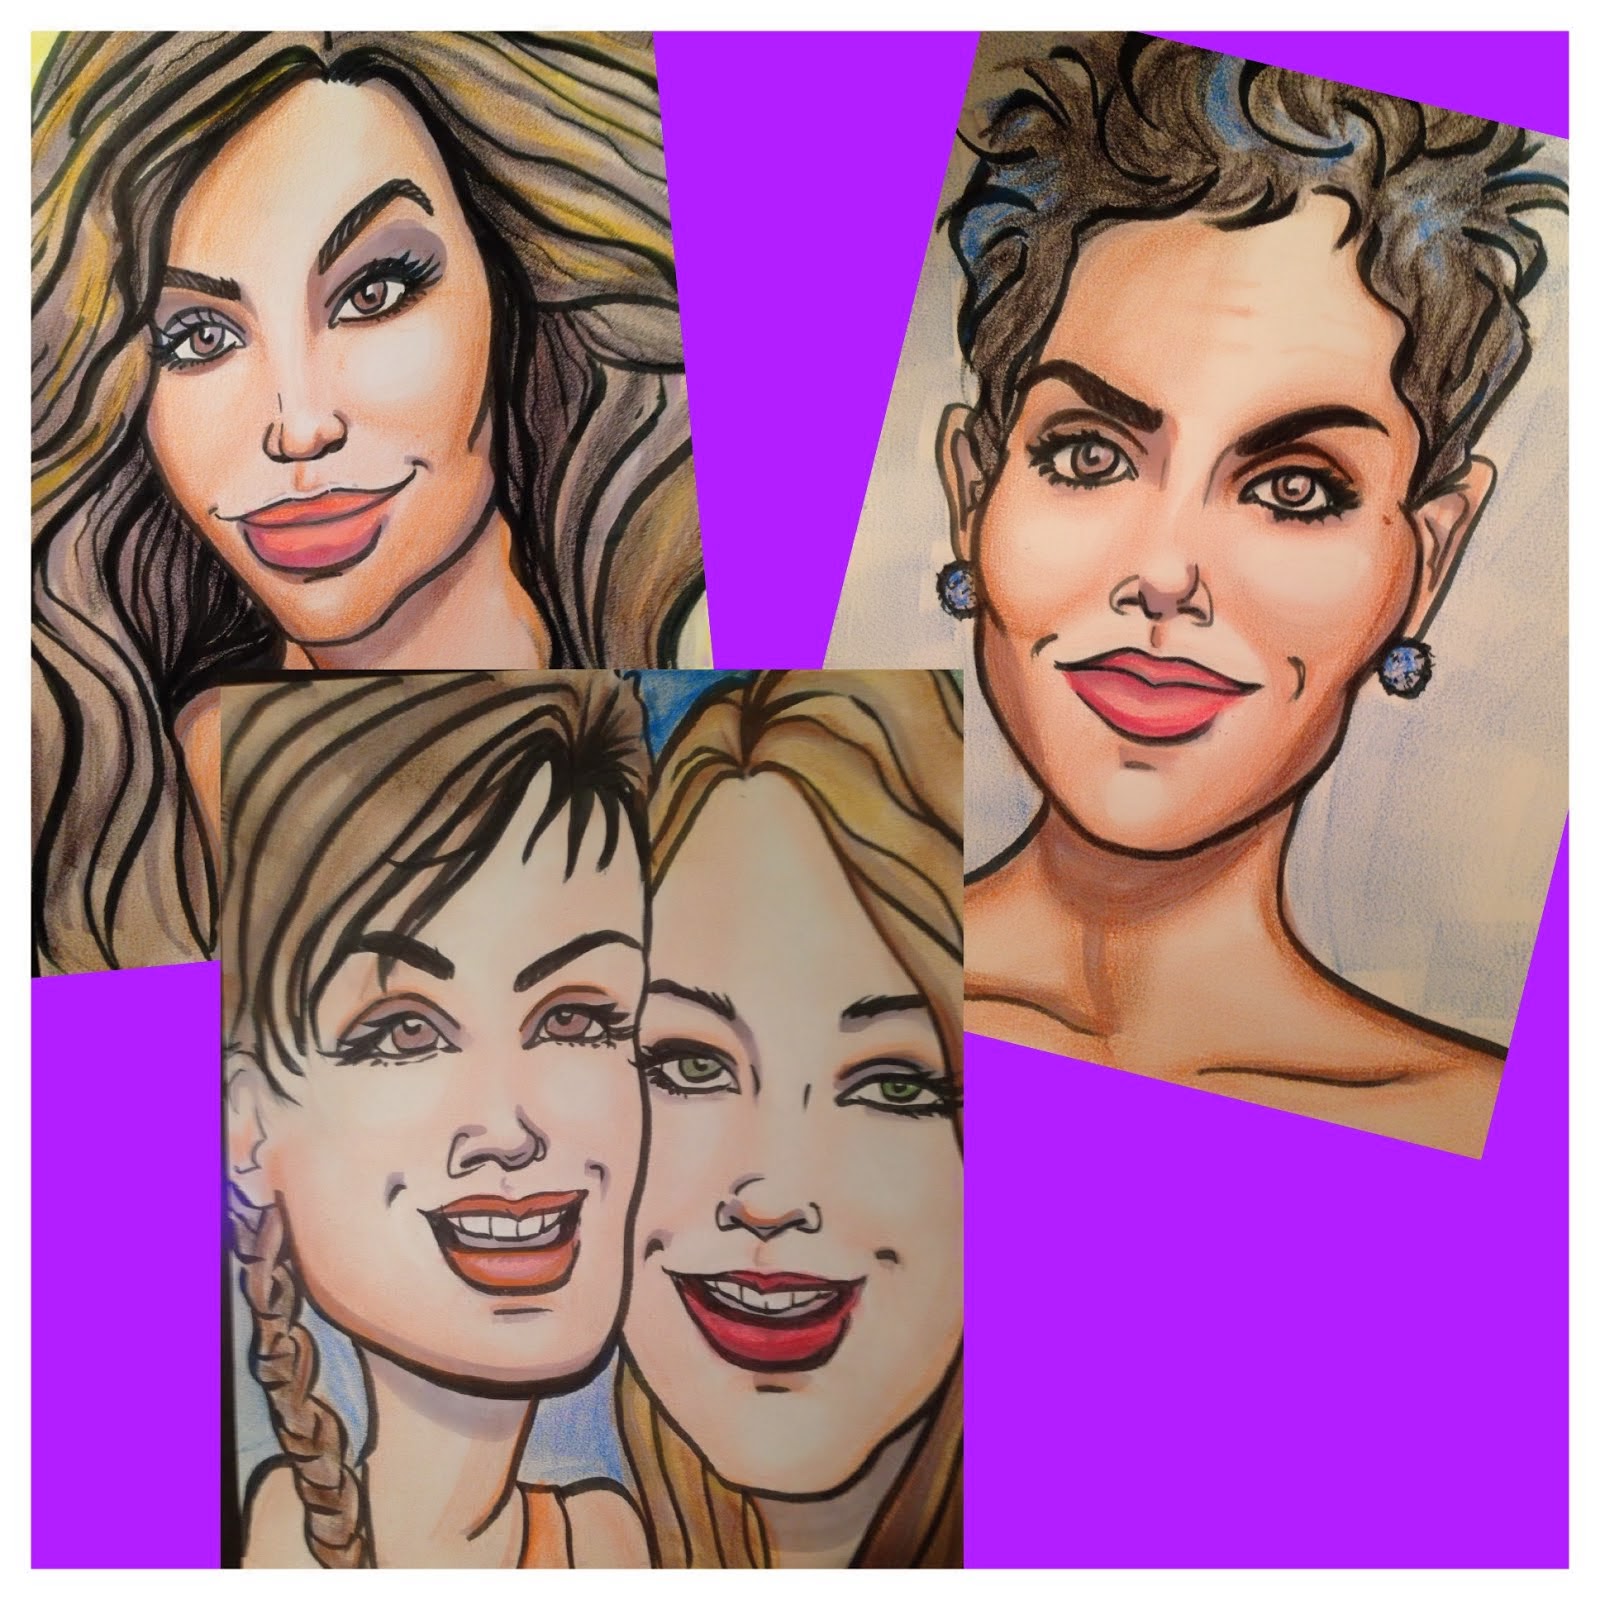 CONNECT with us on FACEBOOK! Click the picture below. www.facebook.com/caricaturesbycolleen.com